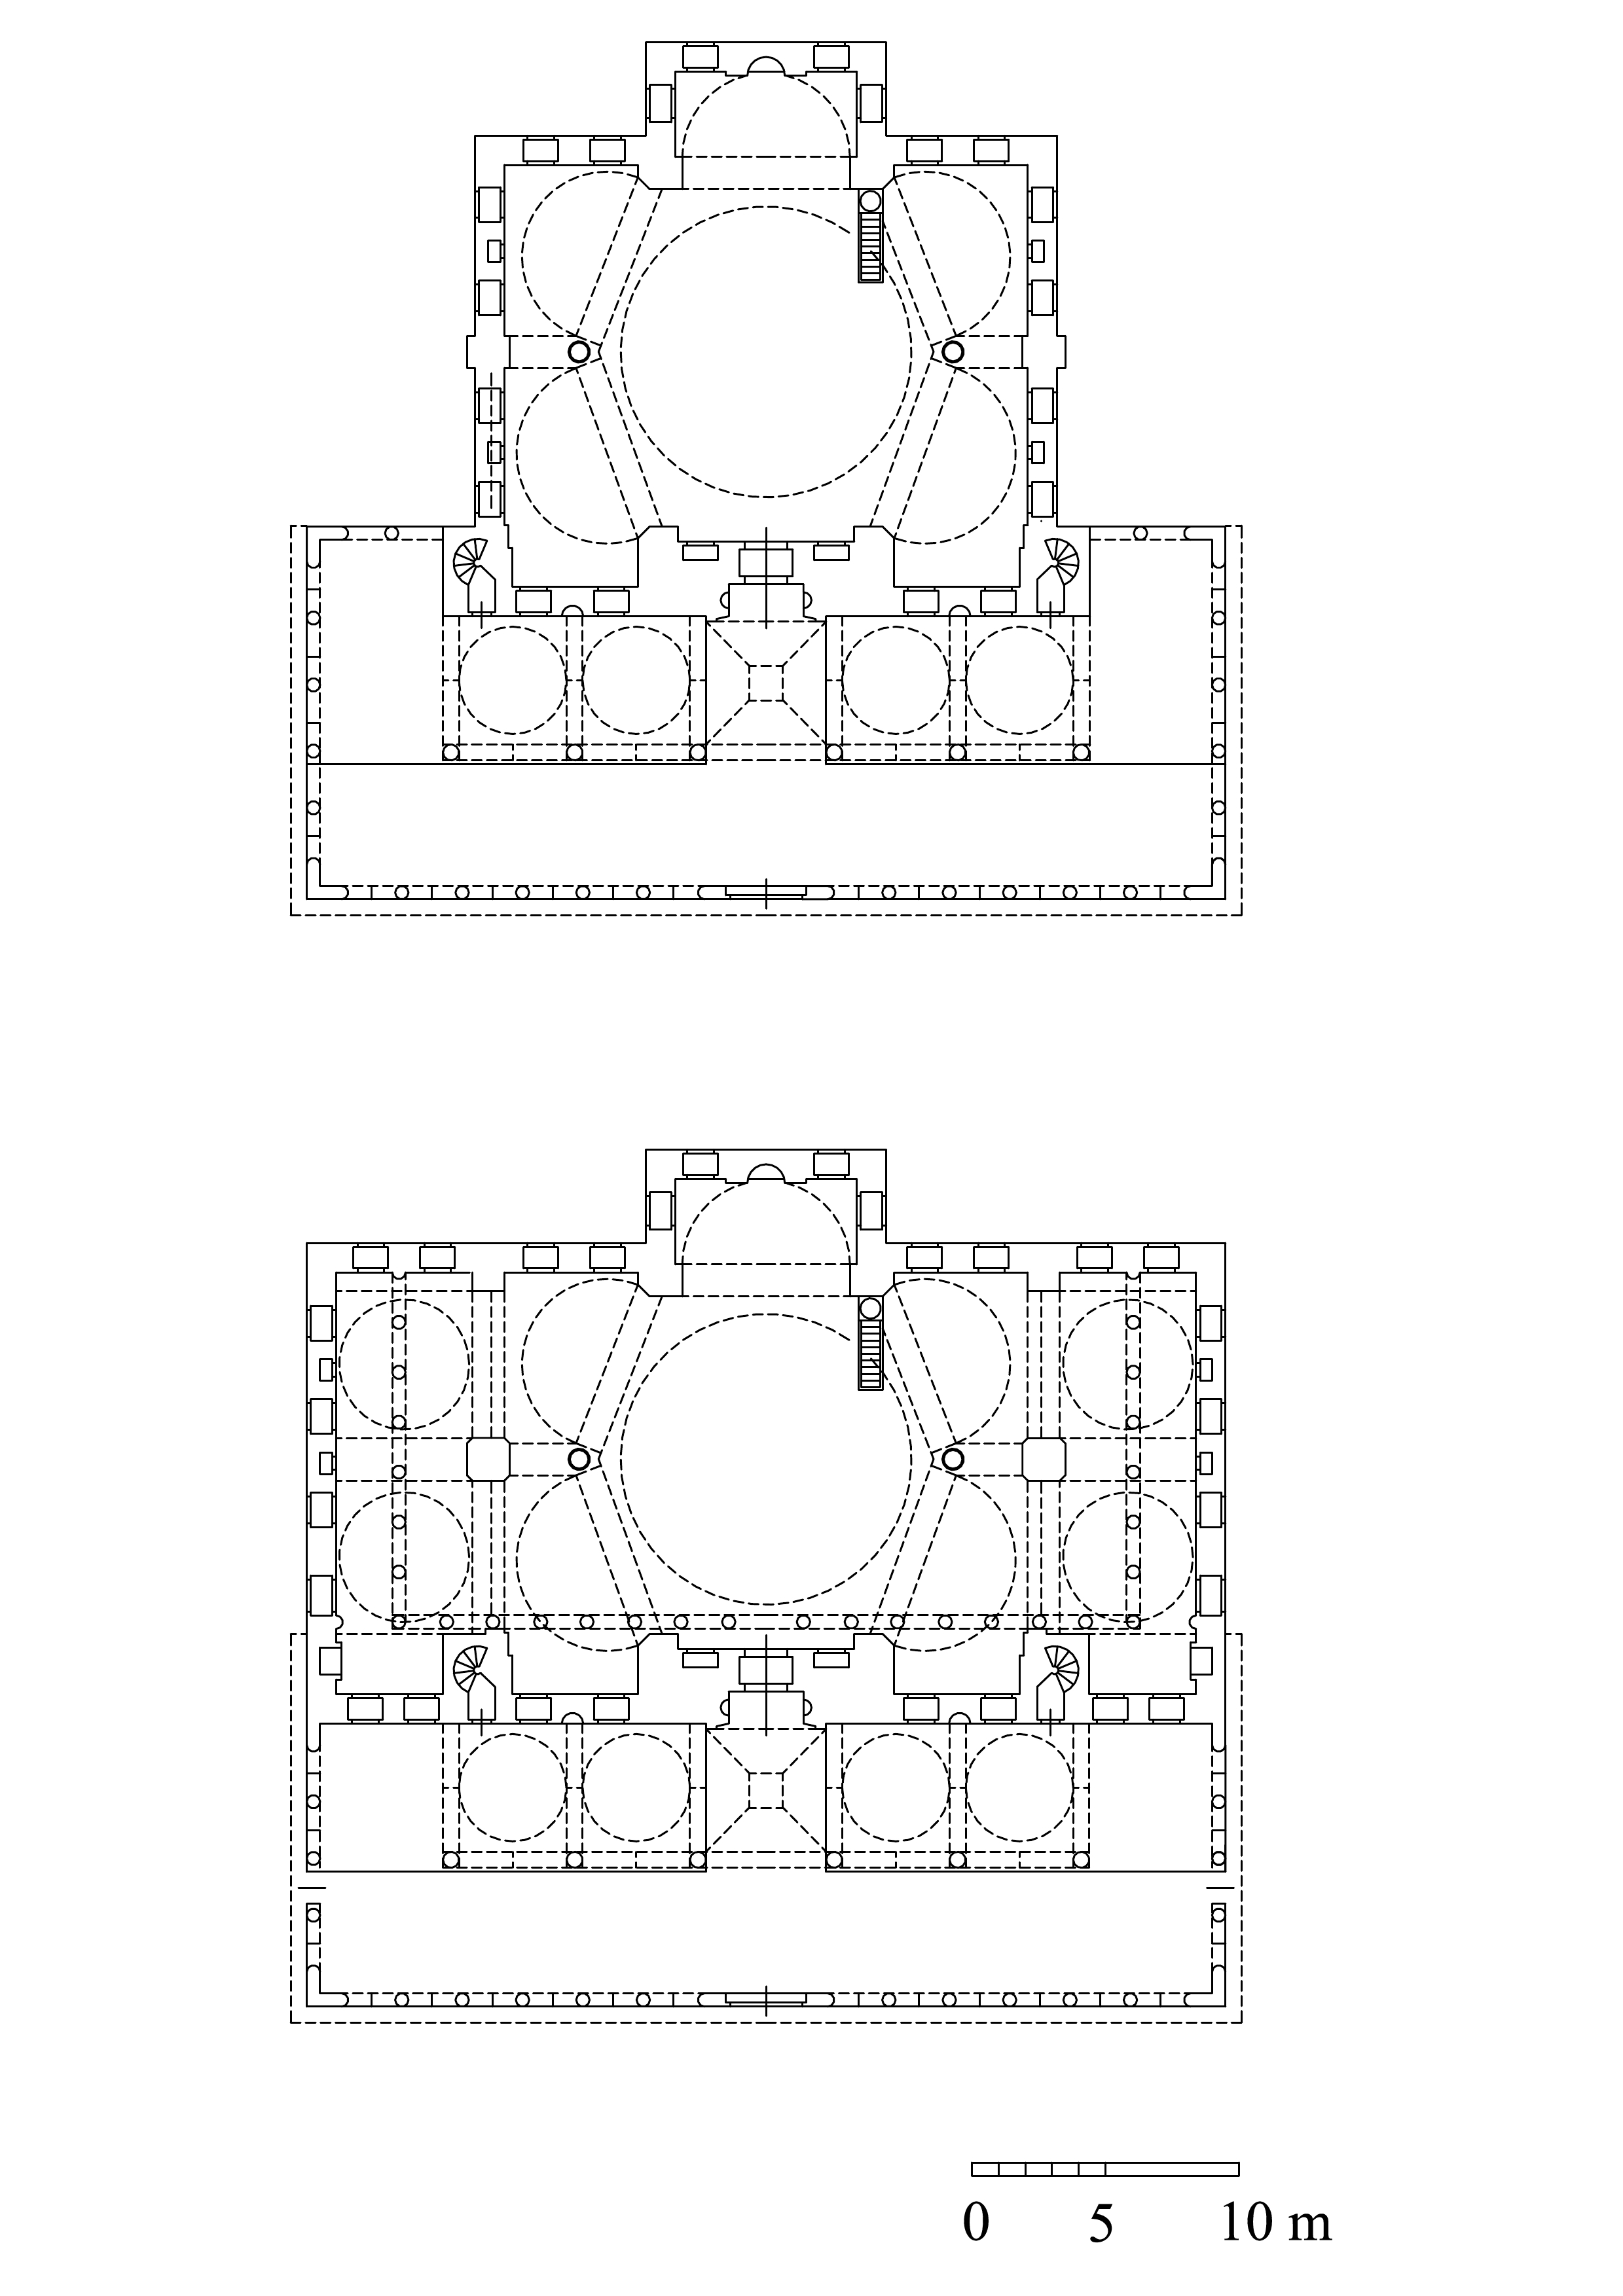 Floor plan  of mosque showing the second and third stages of construction